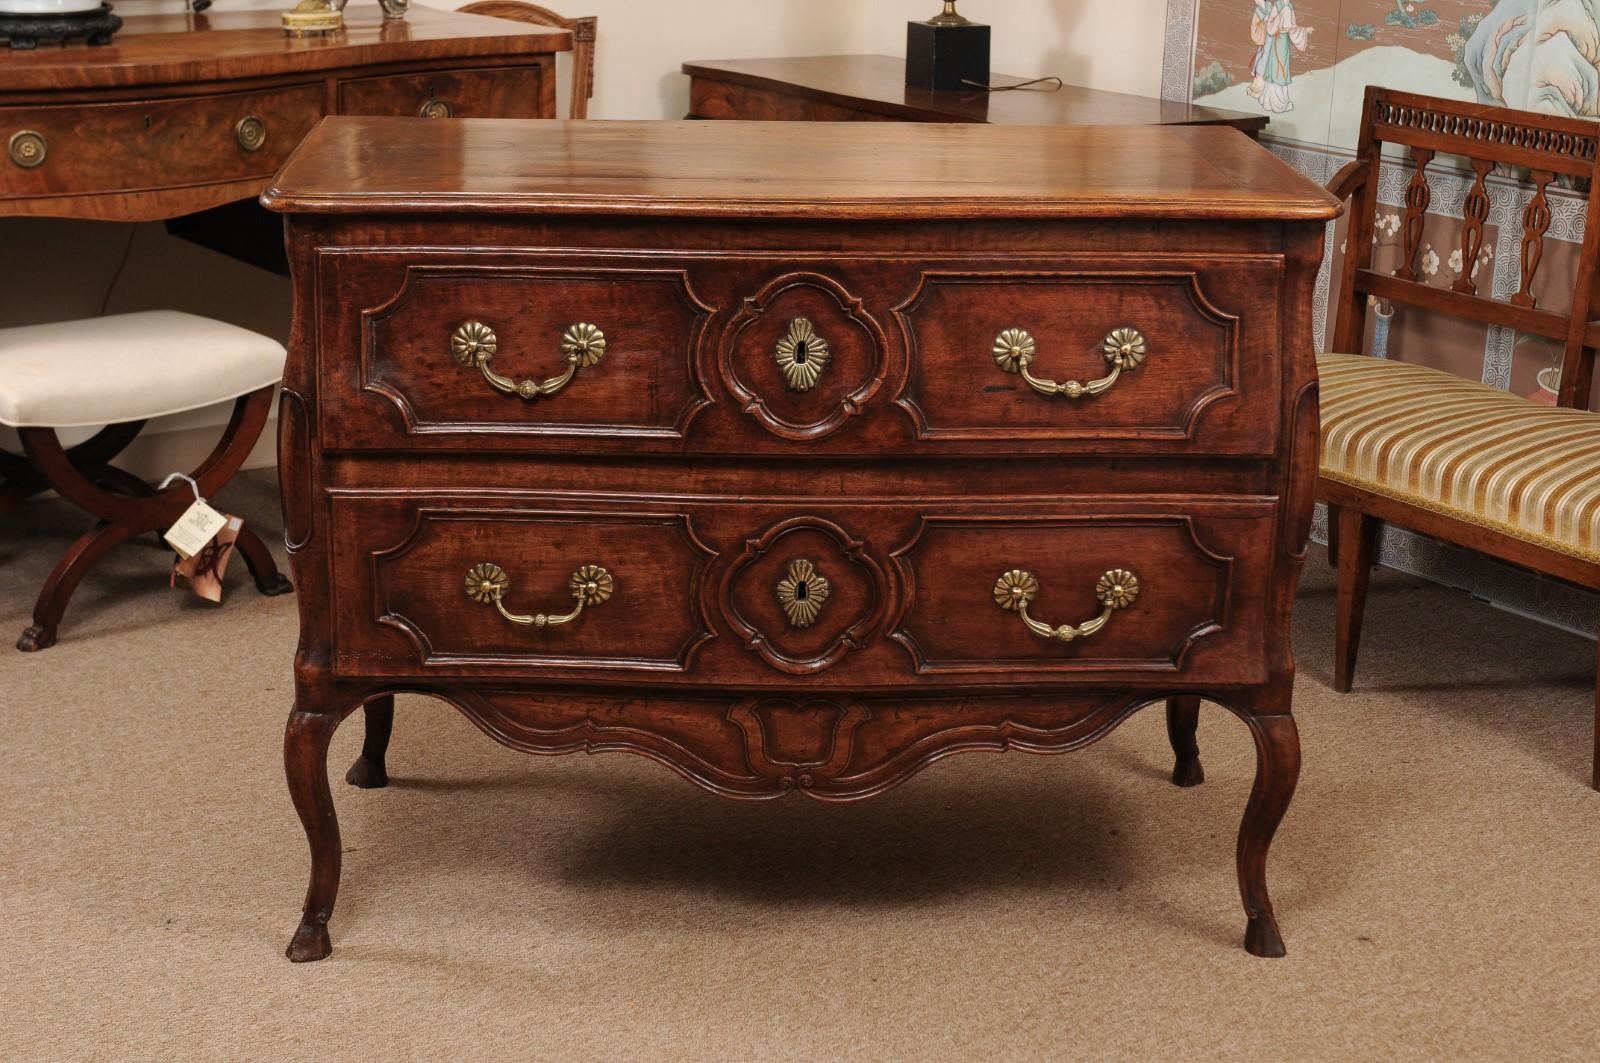 Mid-18th Century French Louis XV Walnut Commode with 2 drawers, Cabriole Legs, & Hoof Feet.